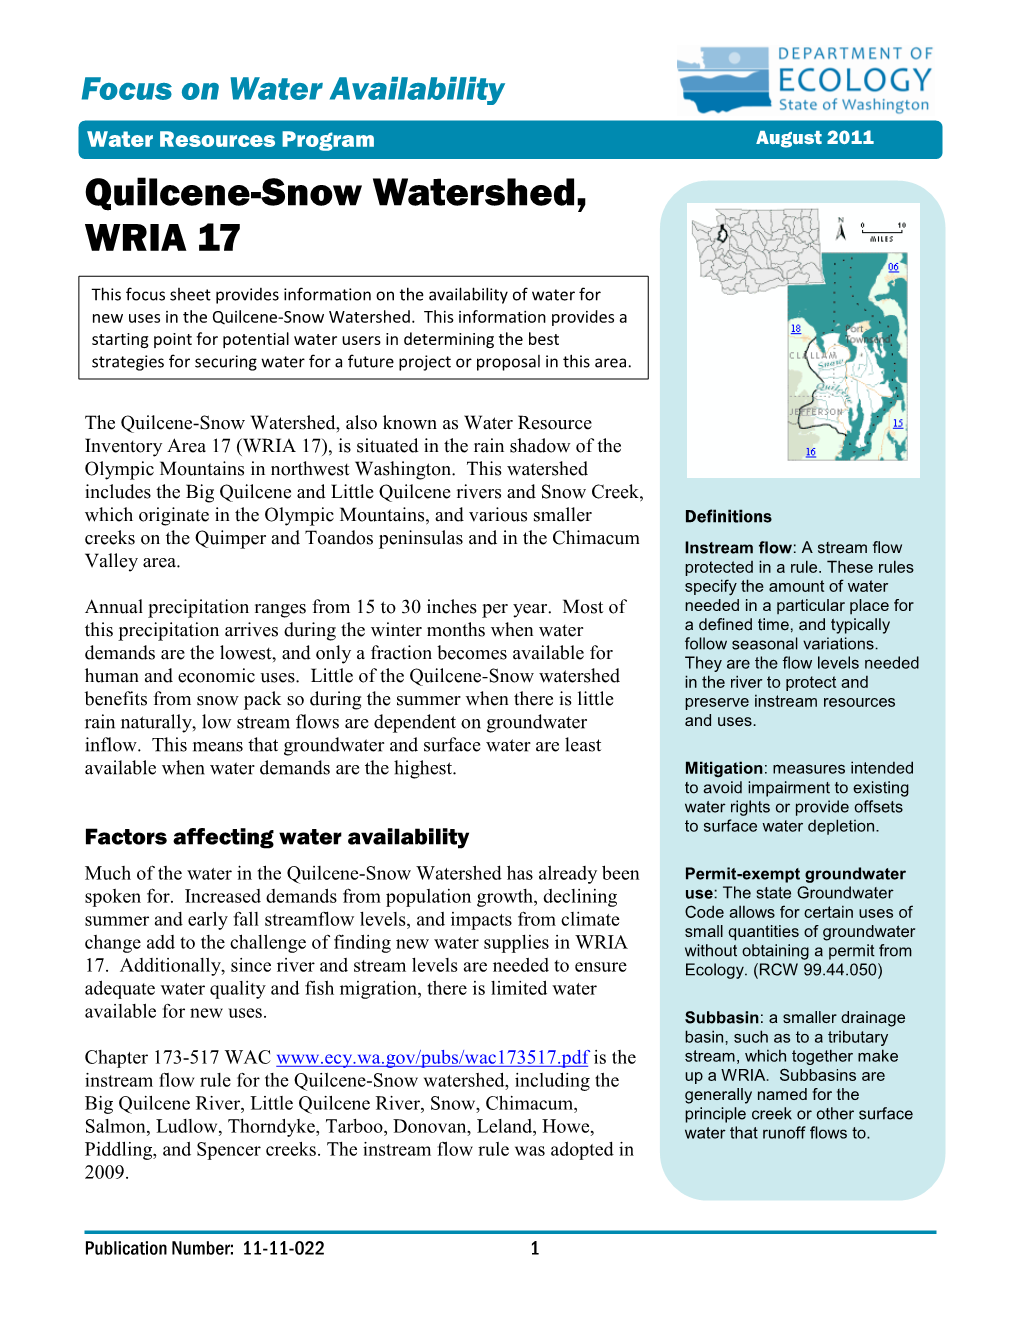 Quilcene-Snow Watershed, WRIA 17